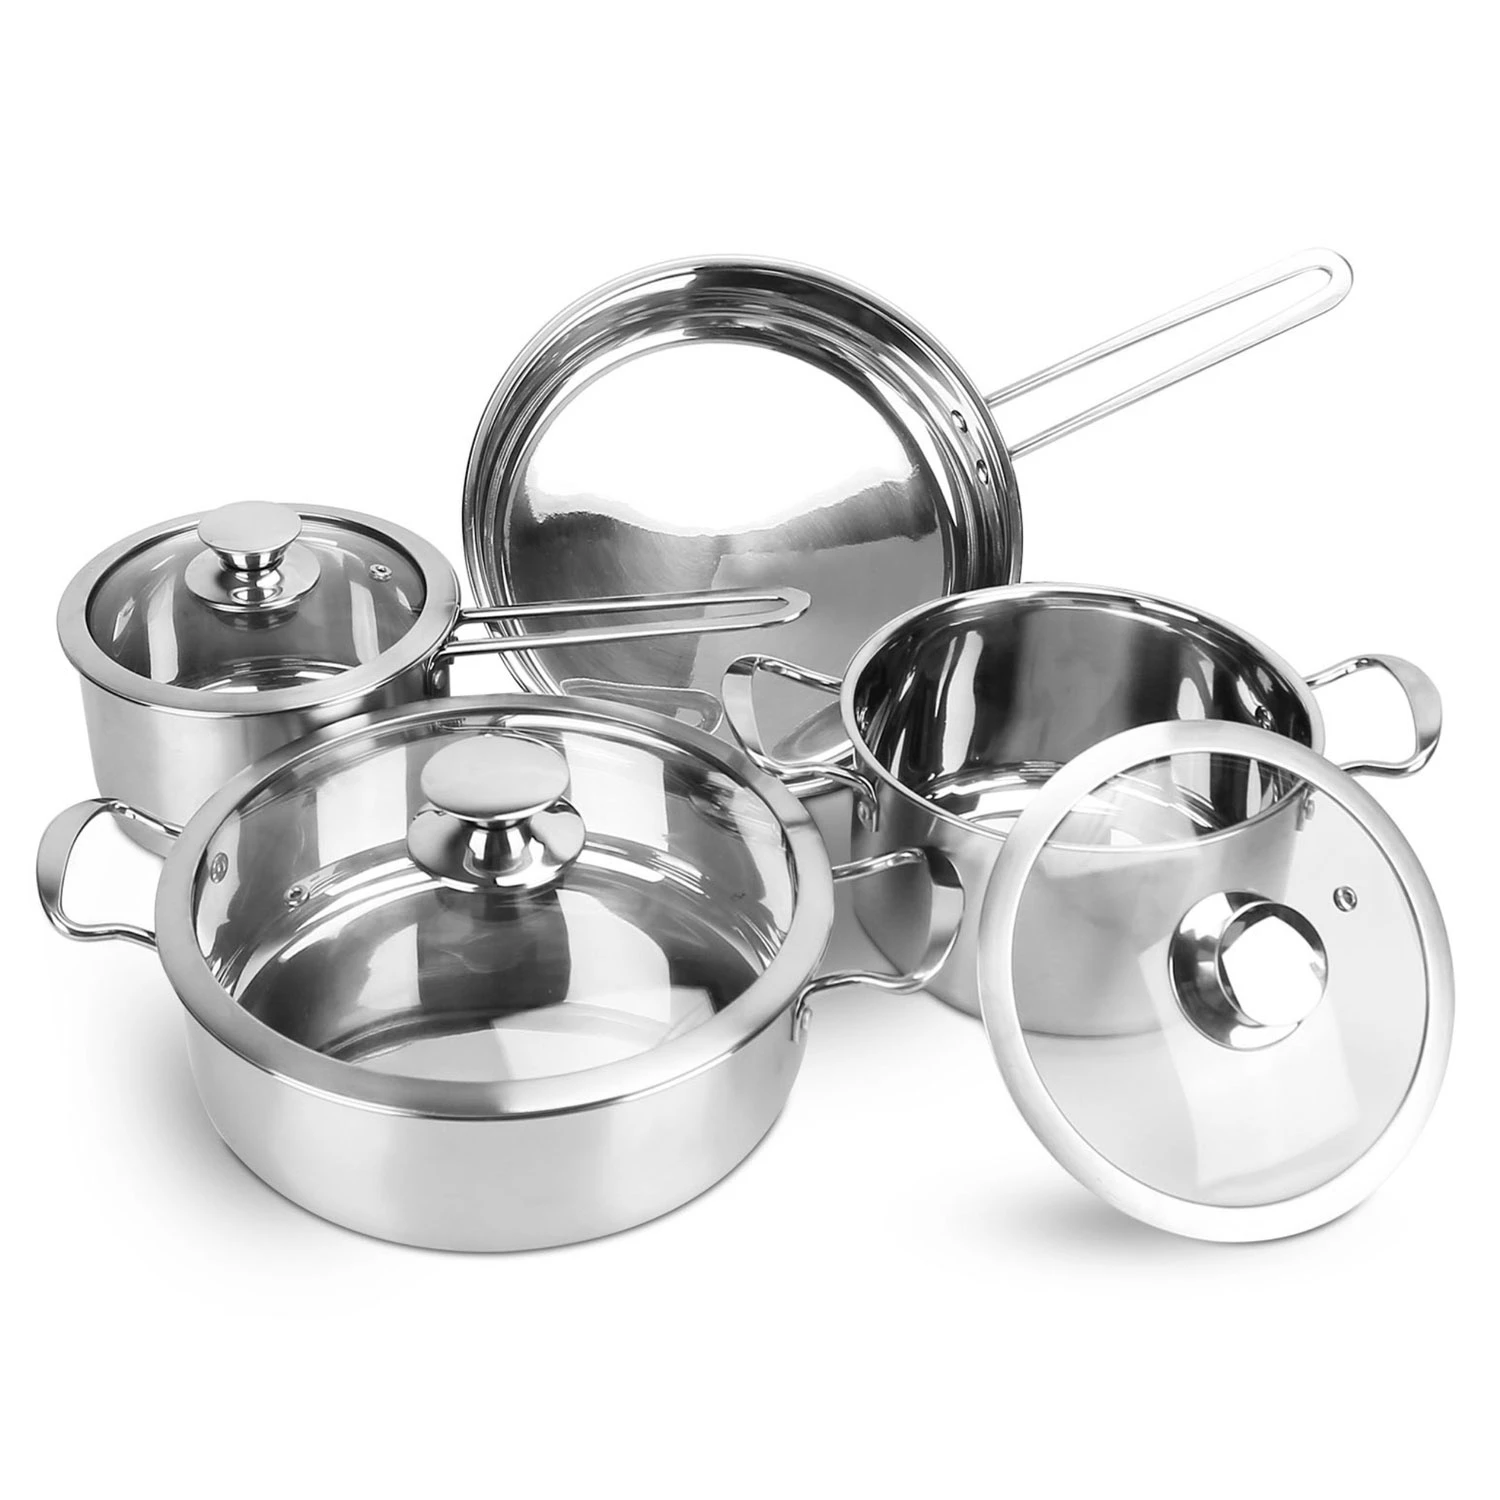 Induction Cookware Set: Stainless Steel, Fast Heat, Dishwasher Safe, 5-Piece